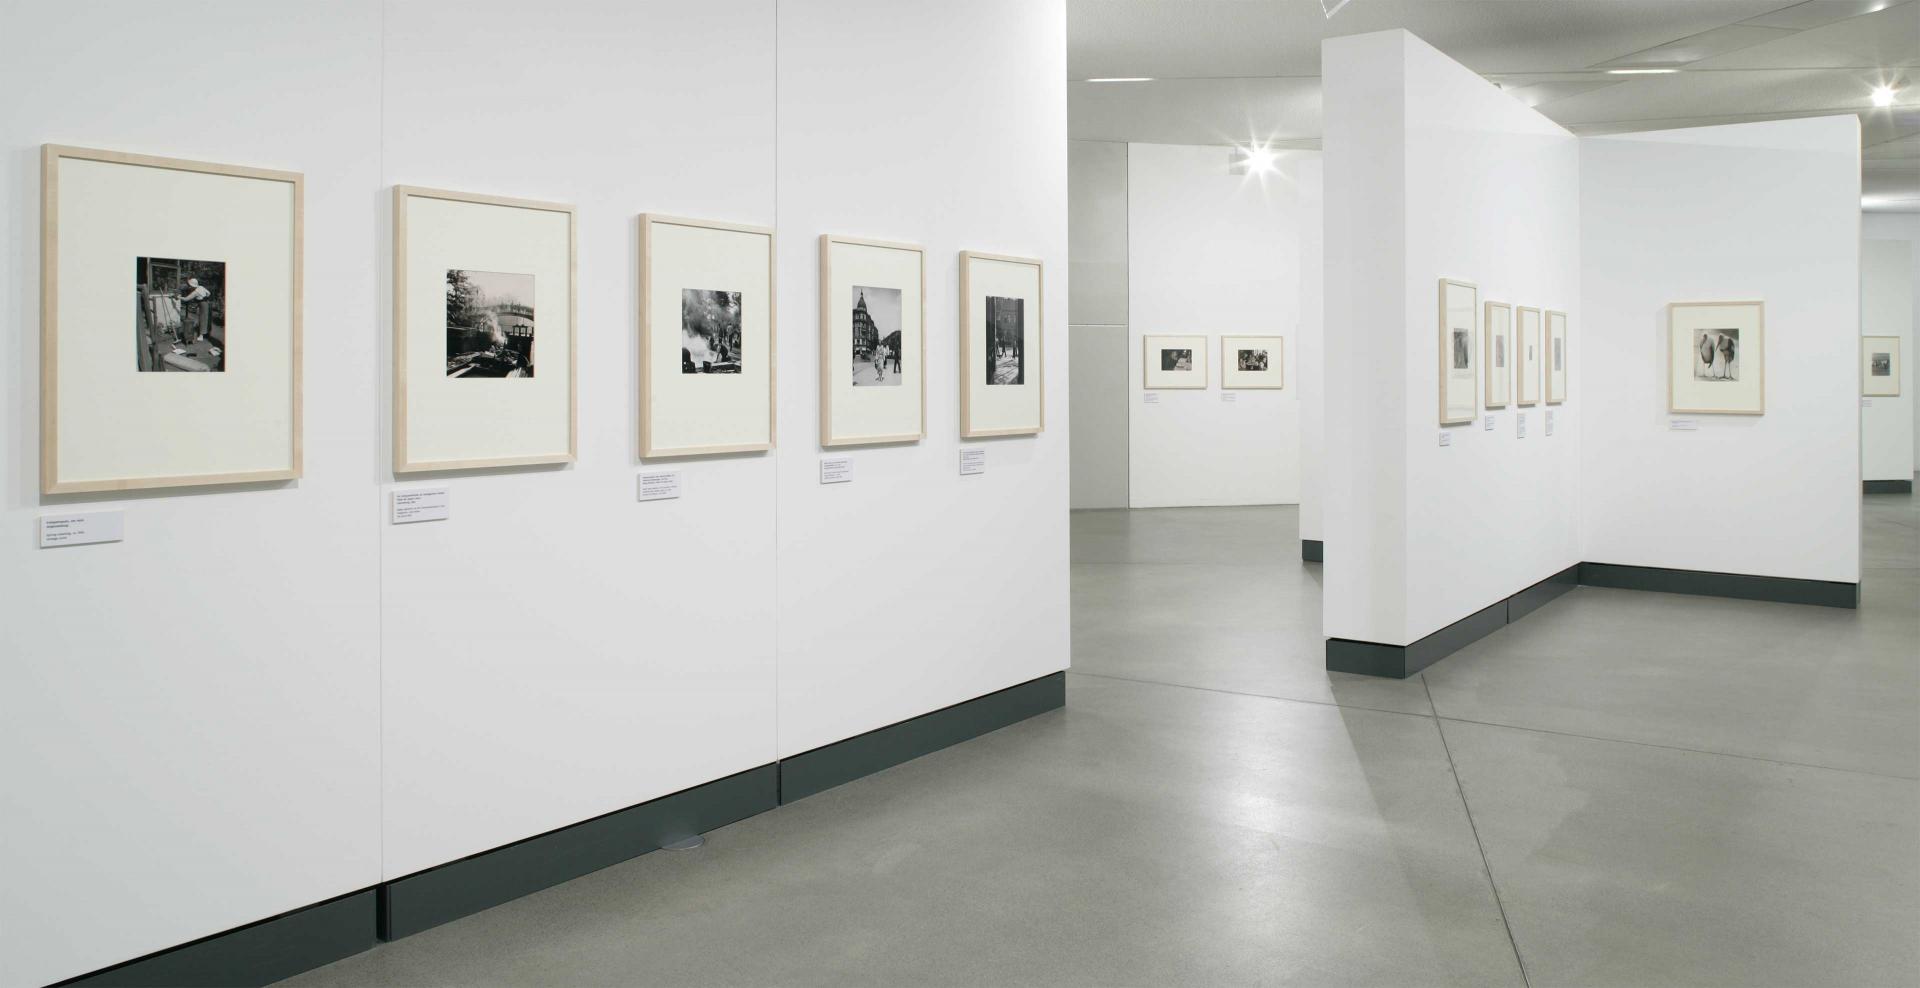 Exhibition walls with framed photographs